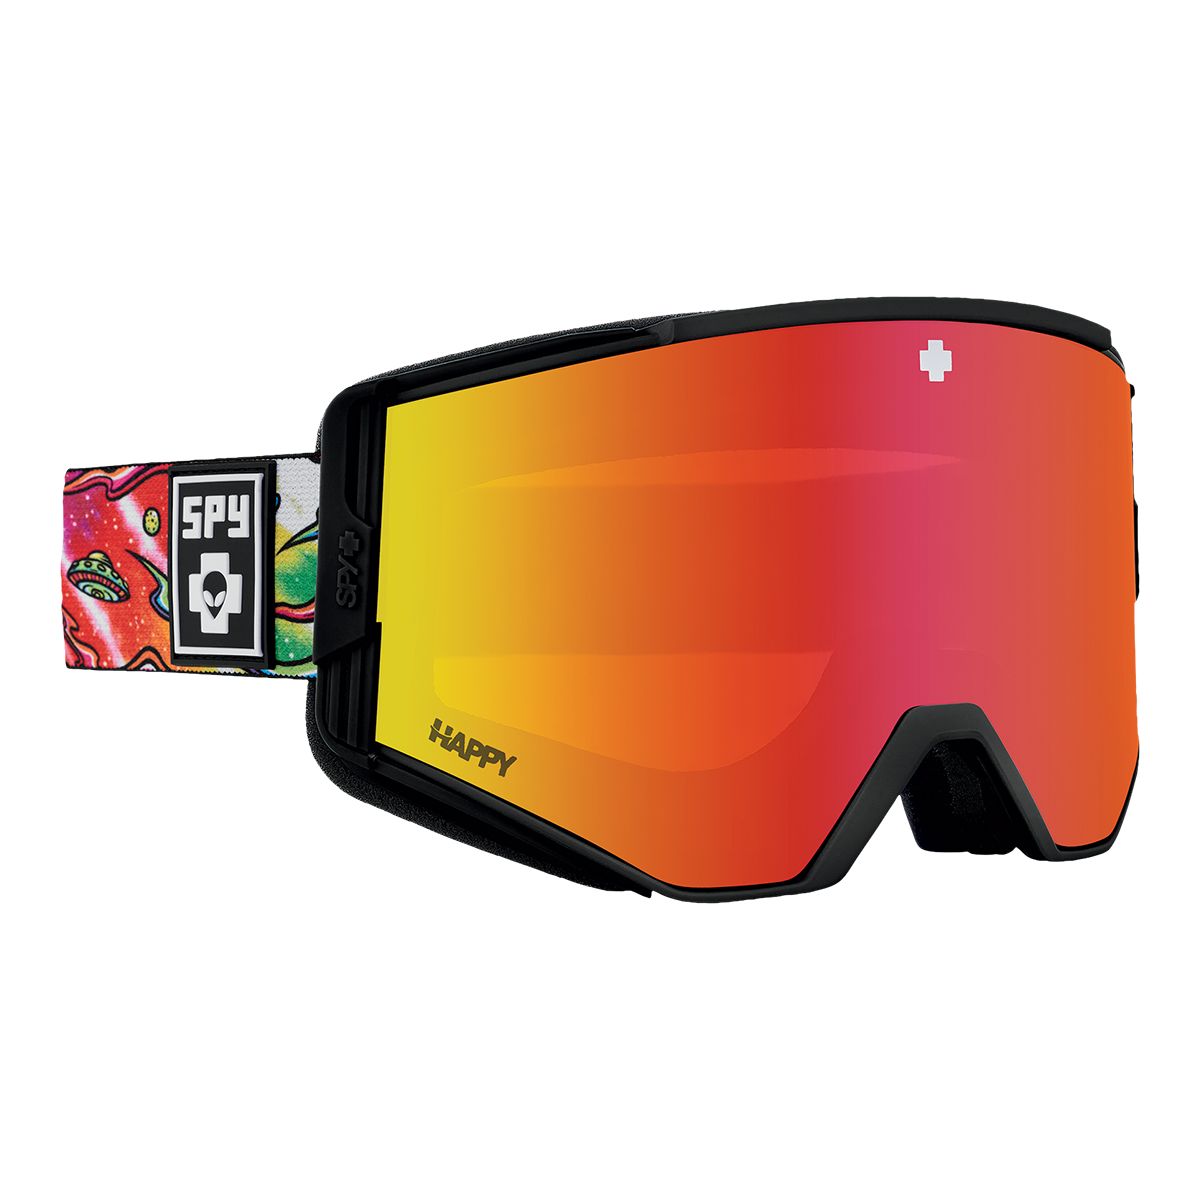 Spy Ace Cosmic Attack Ski & Snowboard Goggles 2021/22 Bronze with Red Spectra Mirror Lens